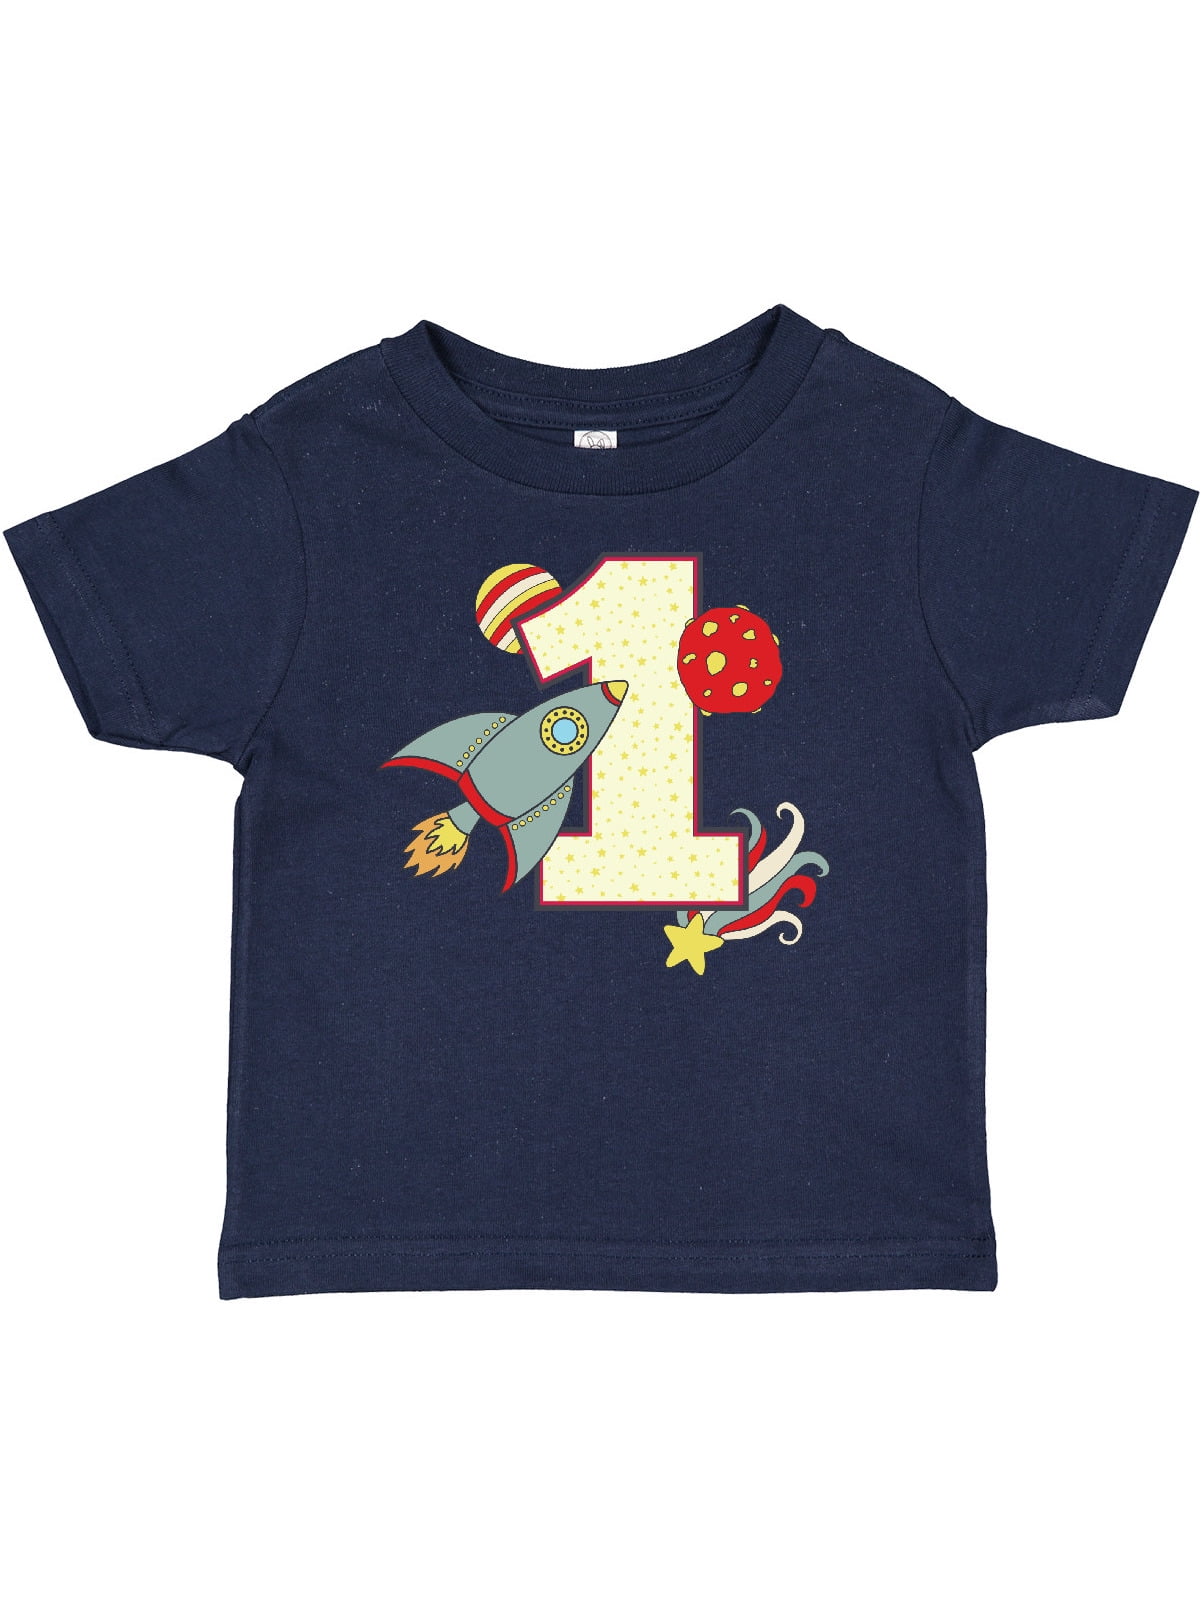 Mickey Mouse Disney All Characters Kids Boys Girls Birthday Unisex T shirt 777 